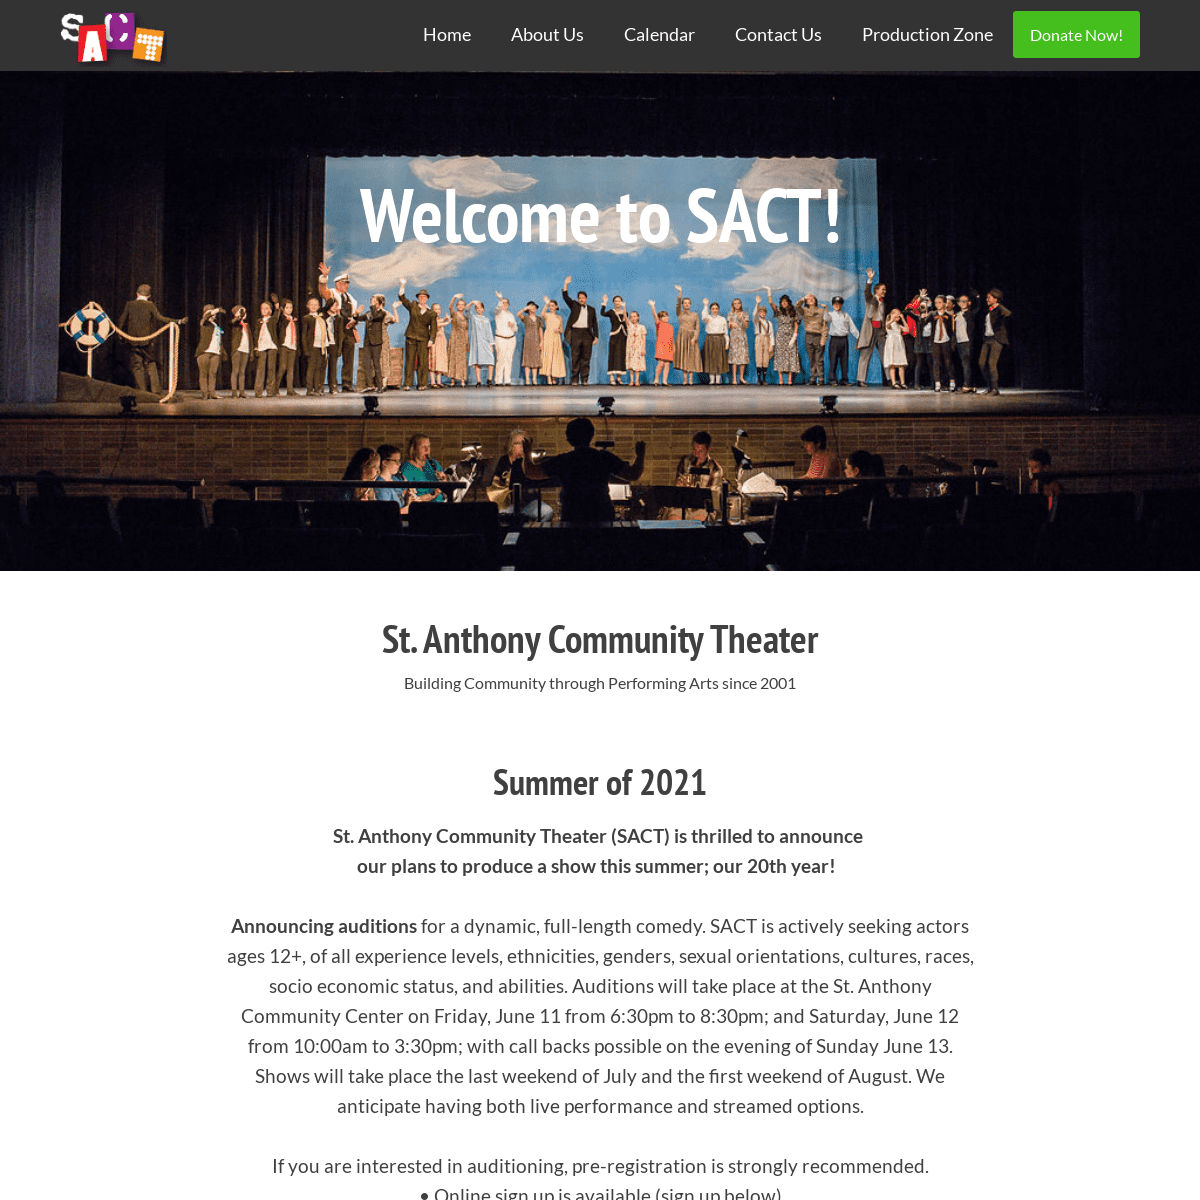 A complete backup of https://sactheater.org